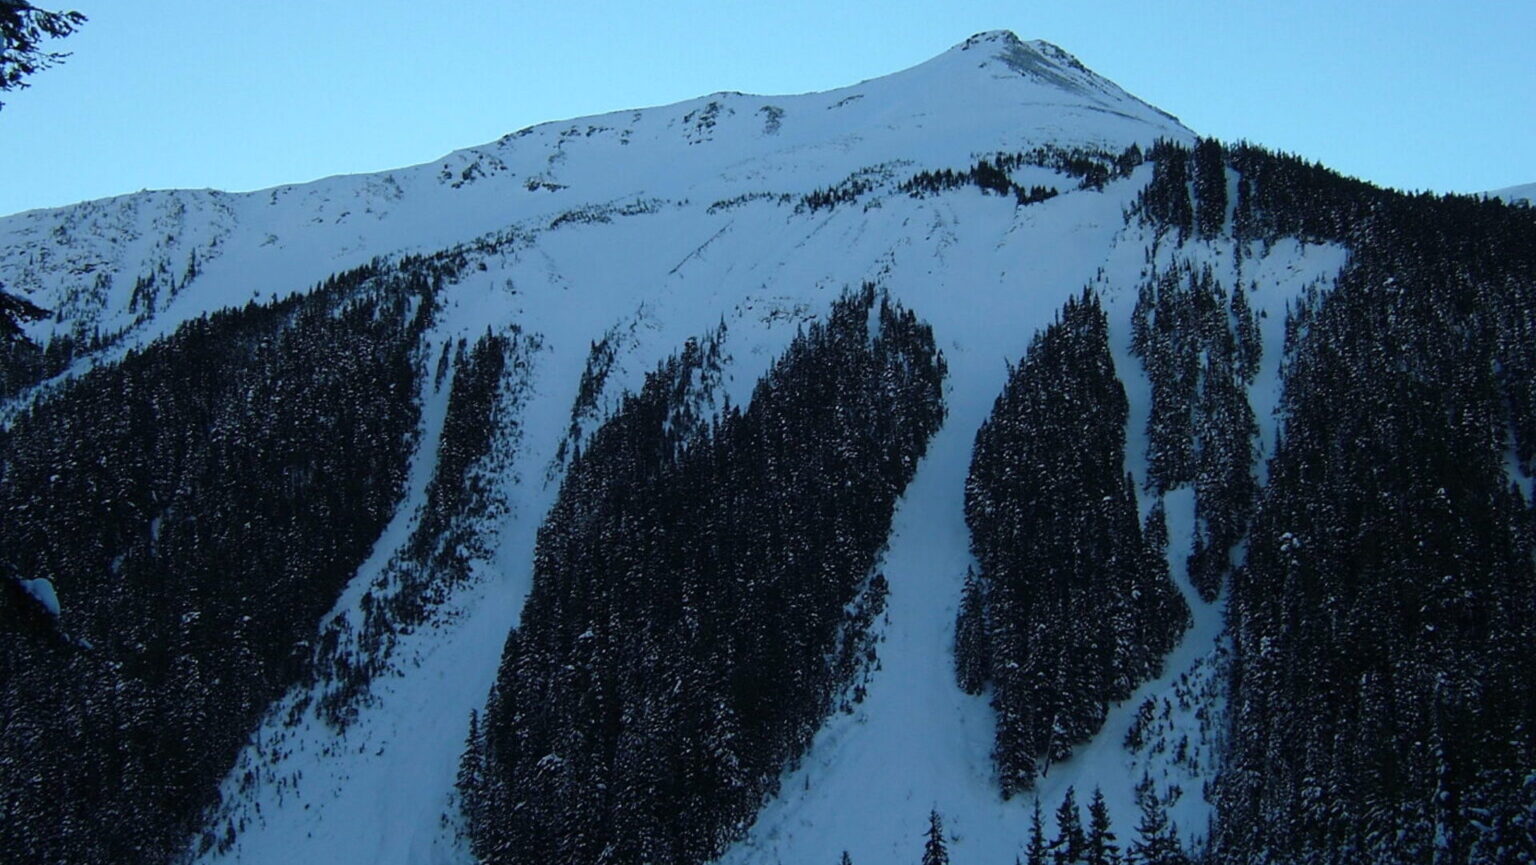 Looking at the North Chutes of Goat Island Mountain